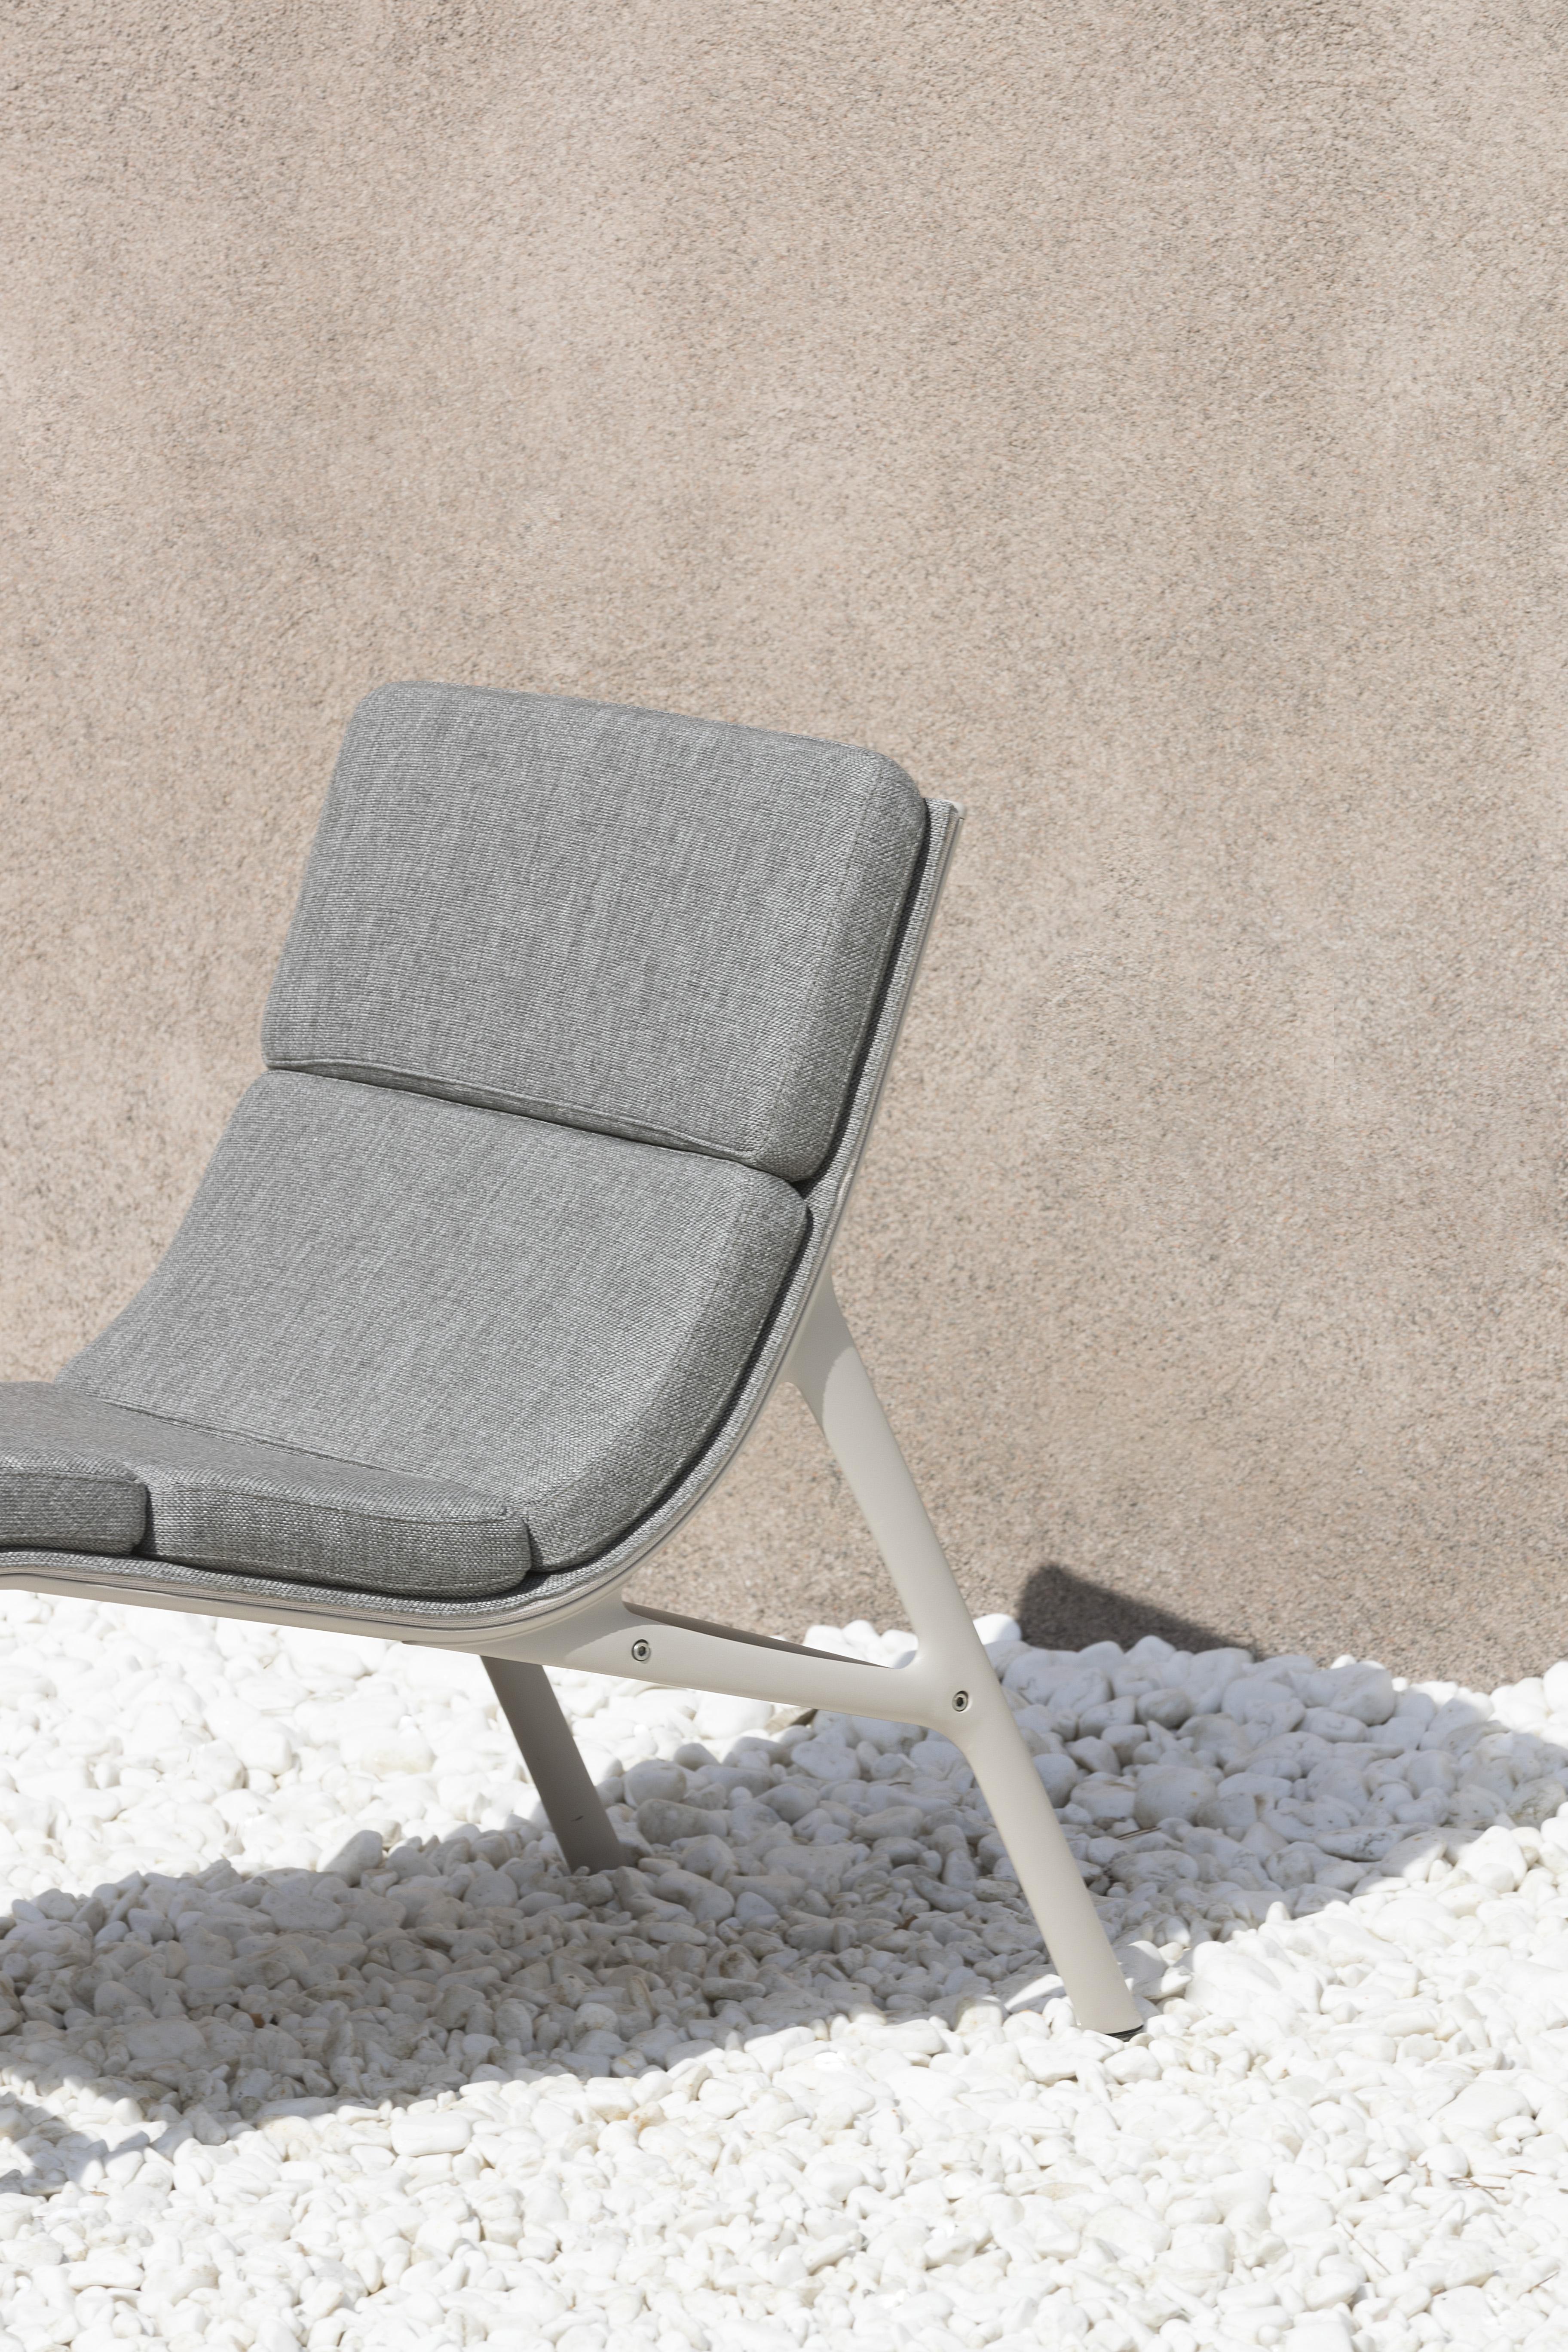 Alias 462 Armframe Soft Chair in White Mesh & Grey Seat with Lacquered Frame For Sale 1